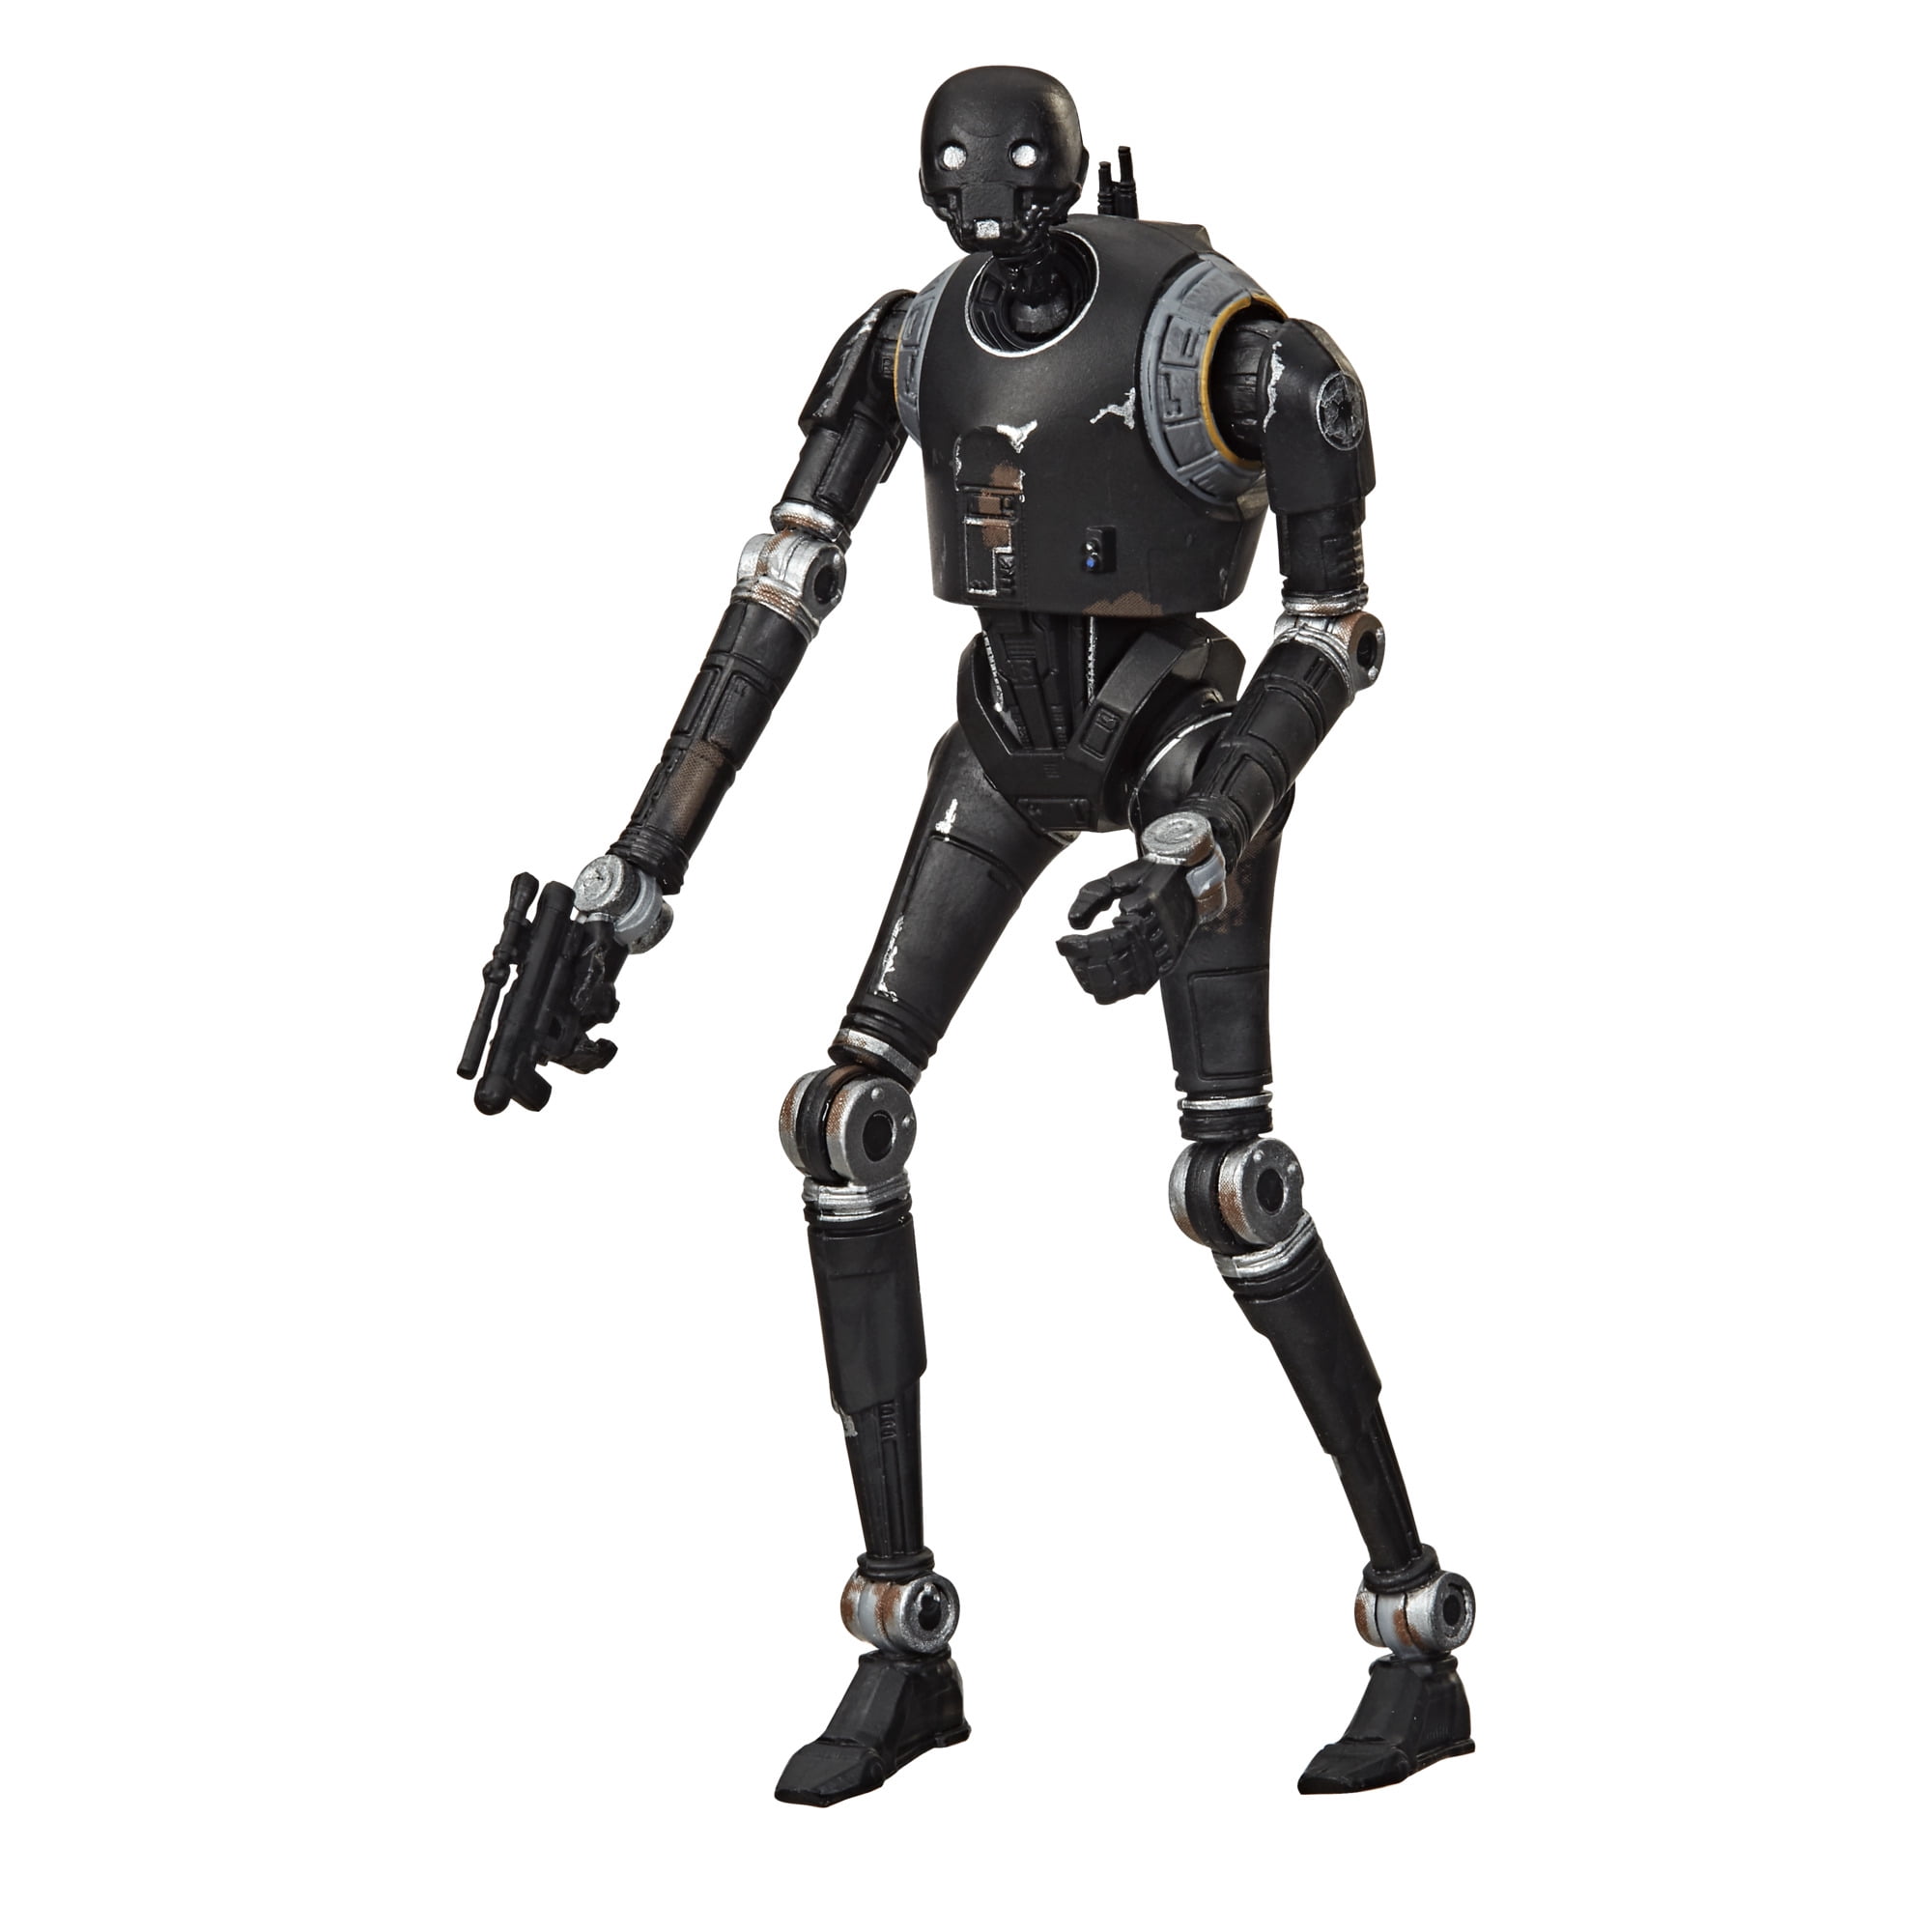 Solo Collection Release Details about   Star Wars Rogue One K2SO Droid Figure Force Link 2.0 